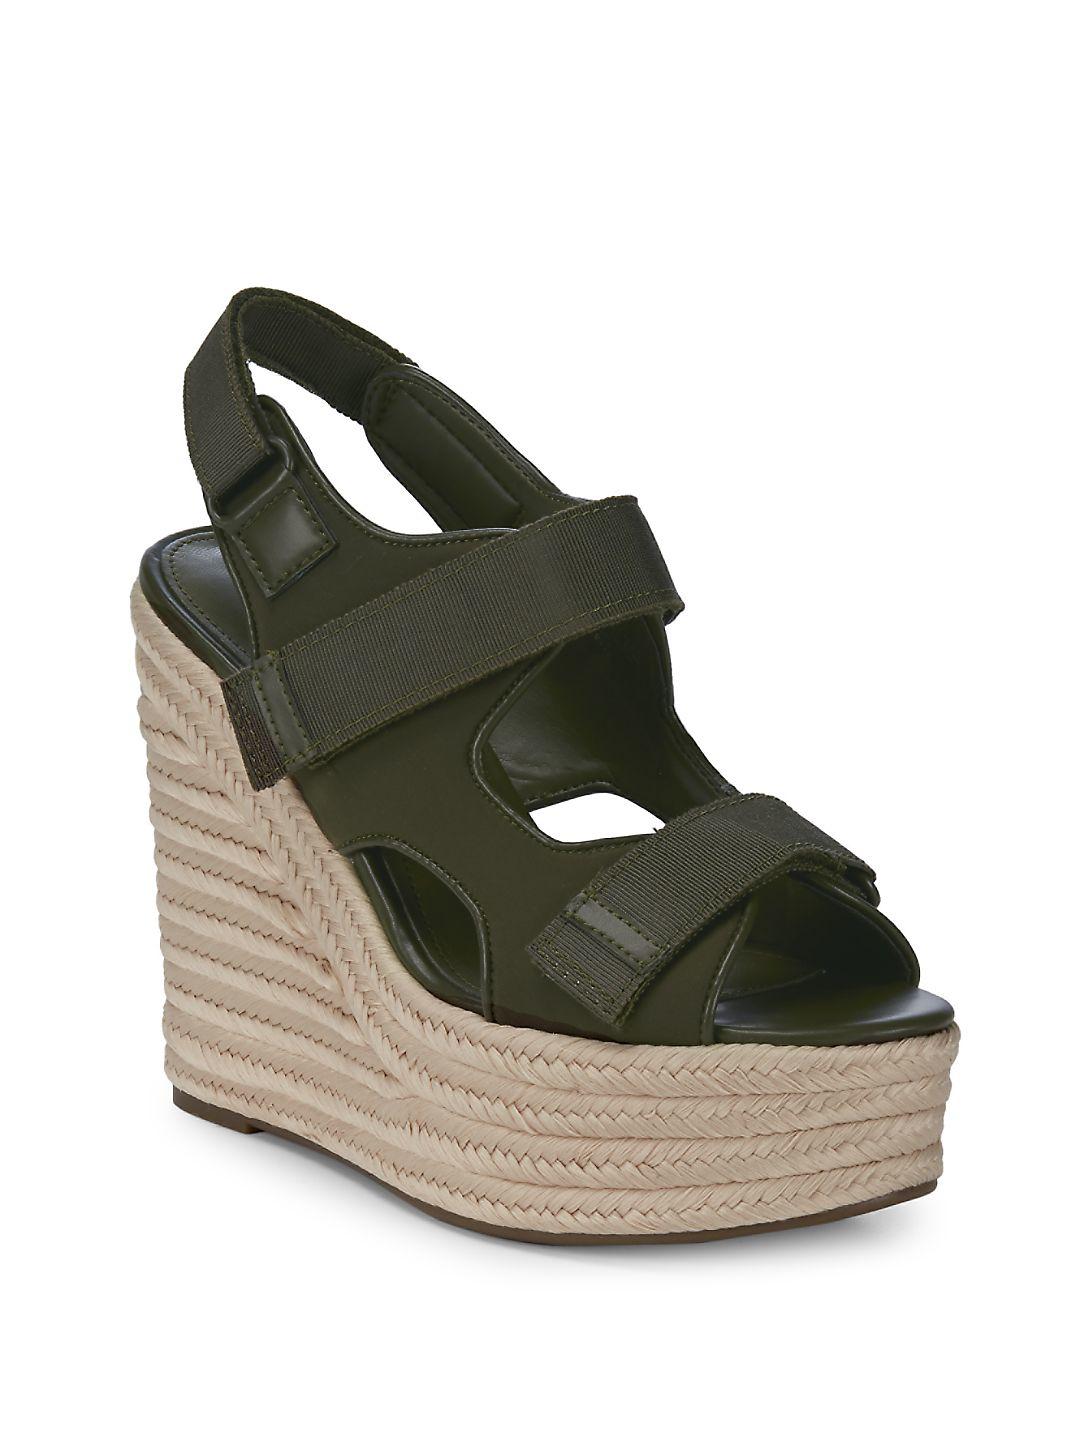 Kendall + Kylie Classic Wedge Sandals in Black - Lyst